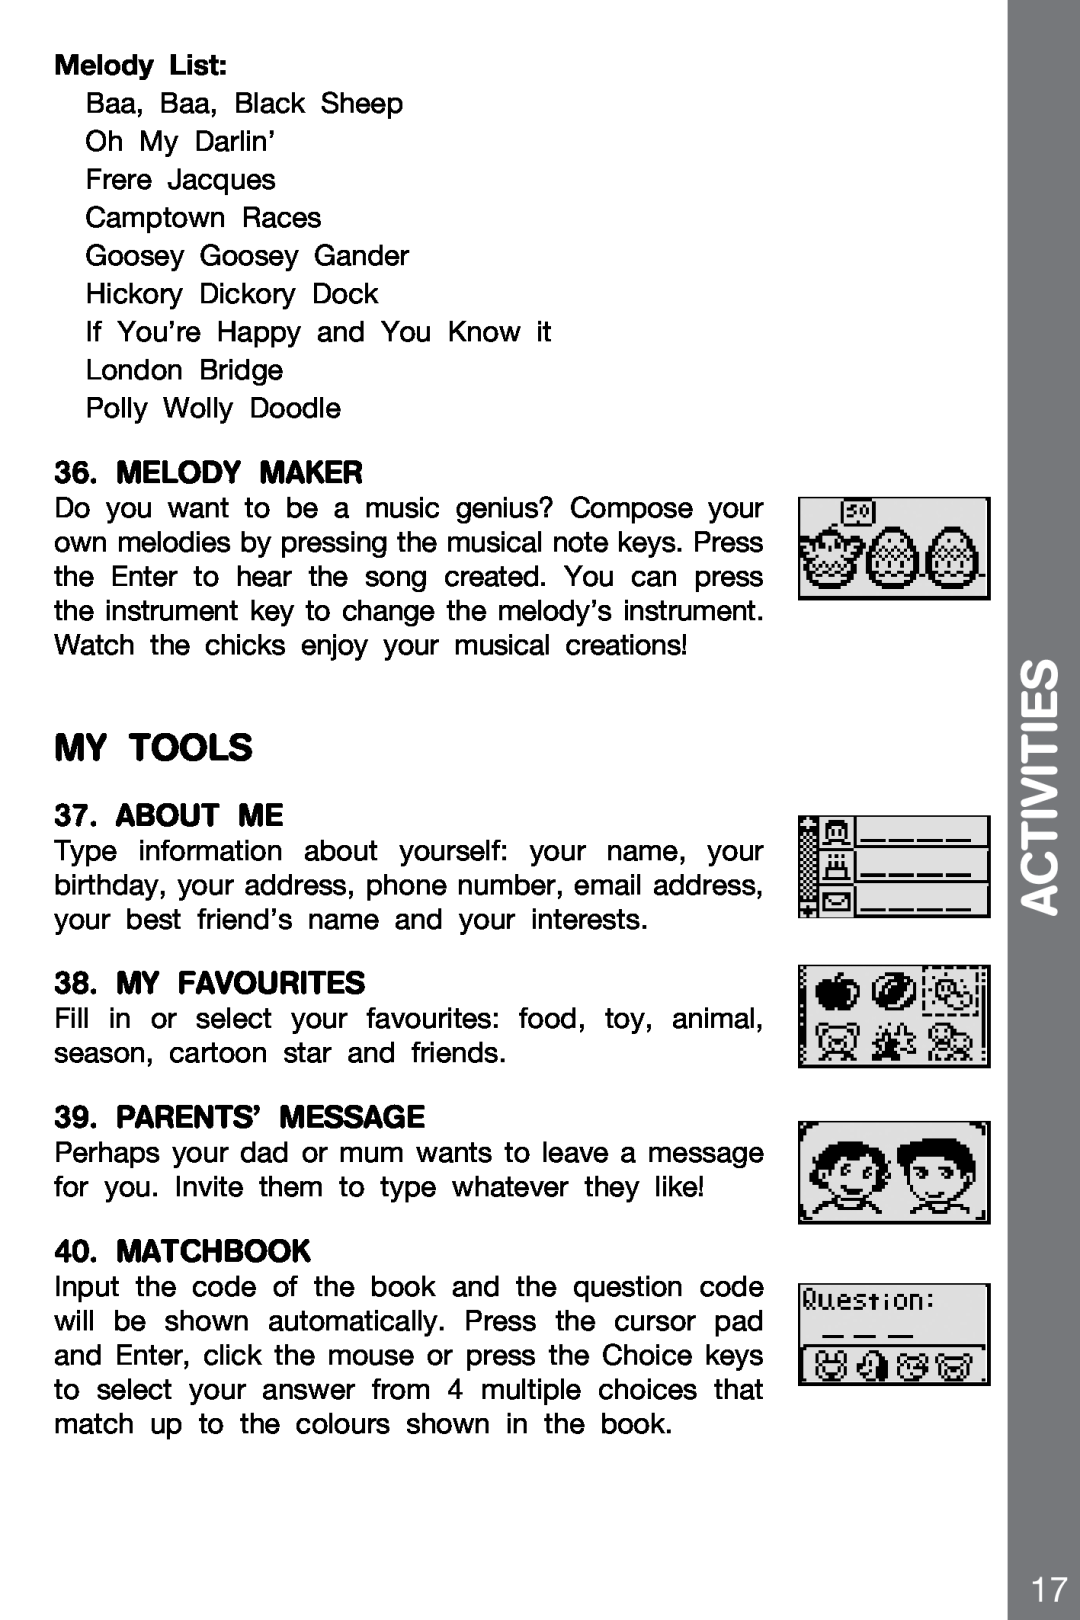 VTech 91-002136-014-000 My Tools, Melody Maker, About Me, My Favourites, PARENTs’ MESSAGE, Matchbook, Melody List 